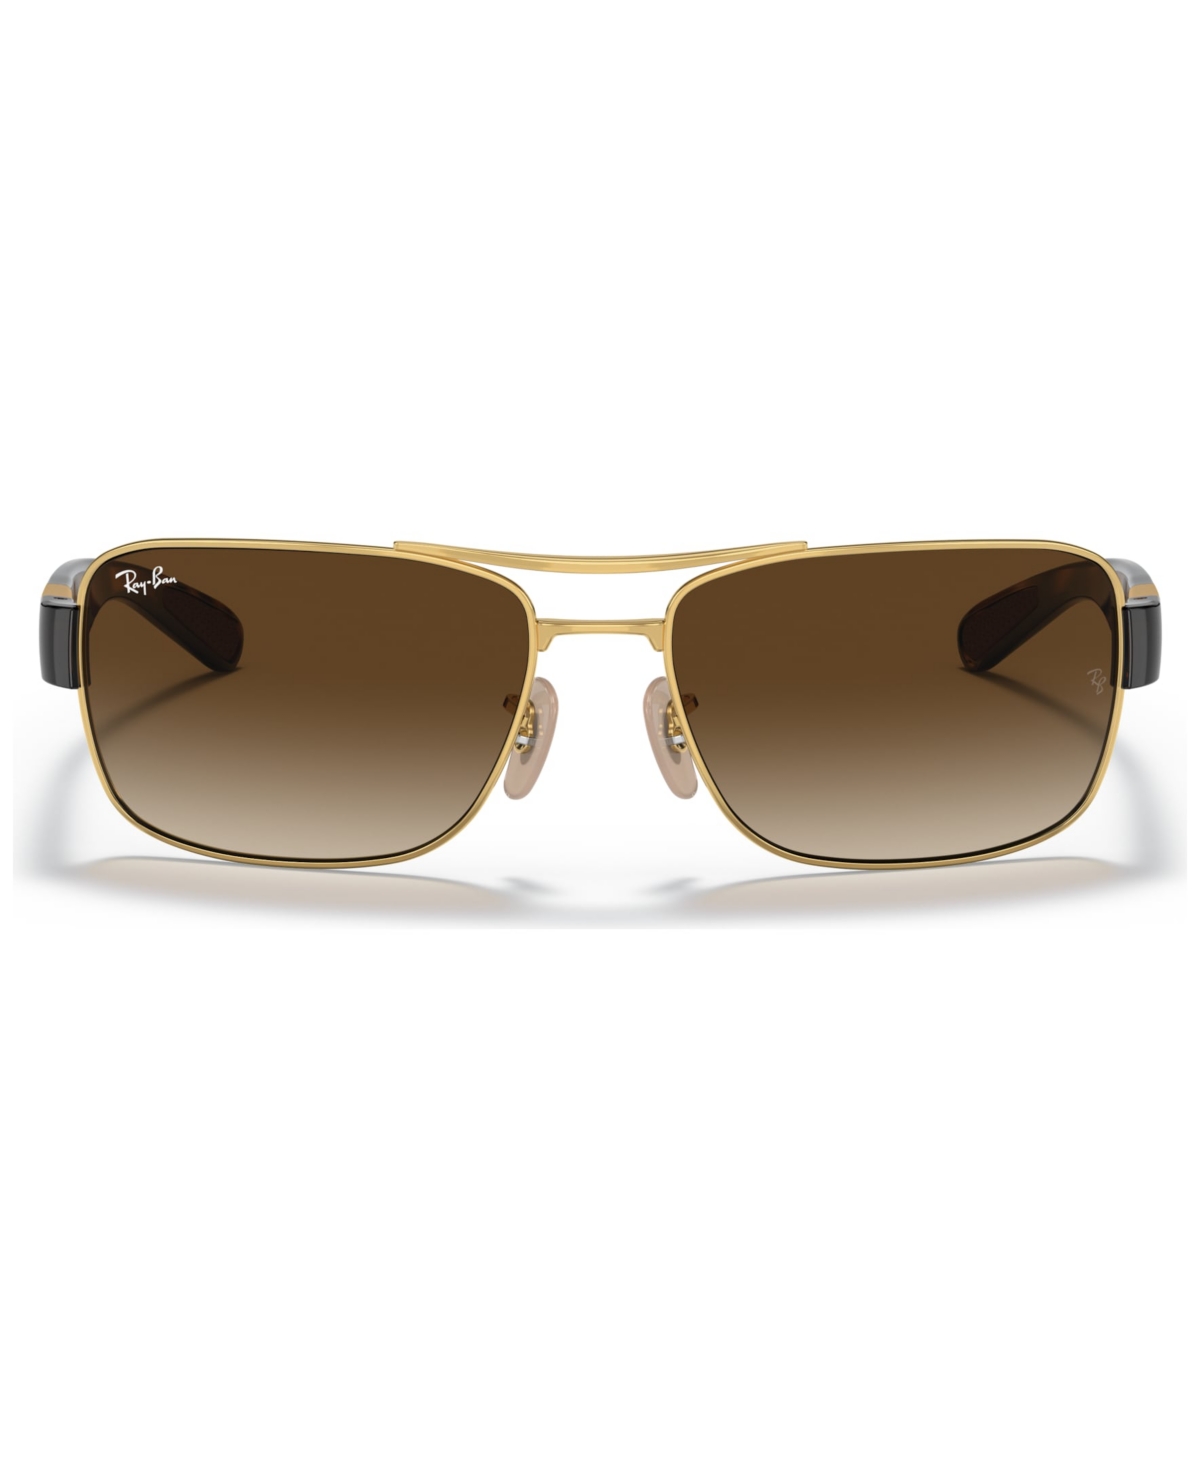 Ray Ban Sunglasses, Rb3522 In Gold,brown Grad